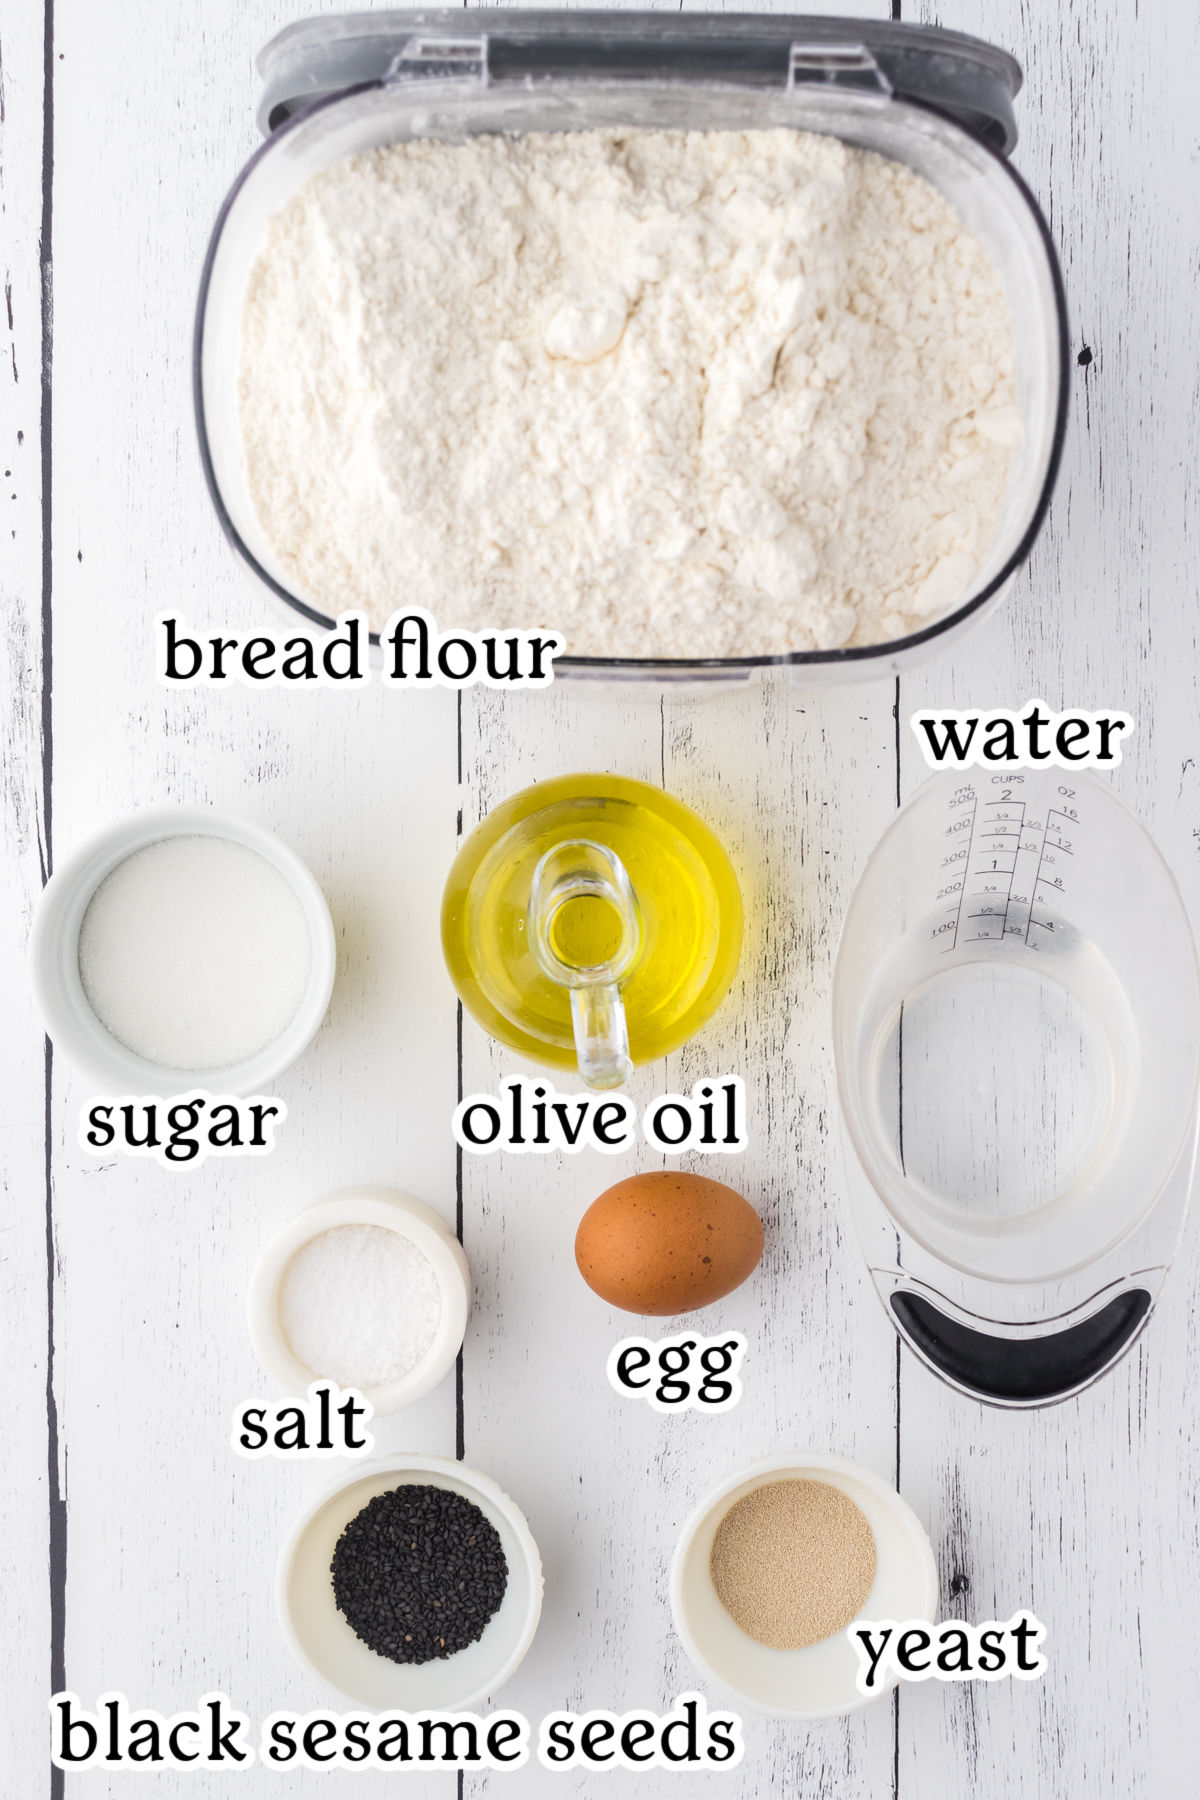 Labeled ingredients for Turkish bread.